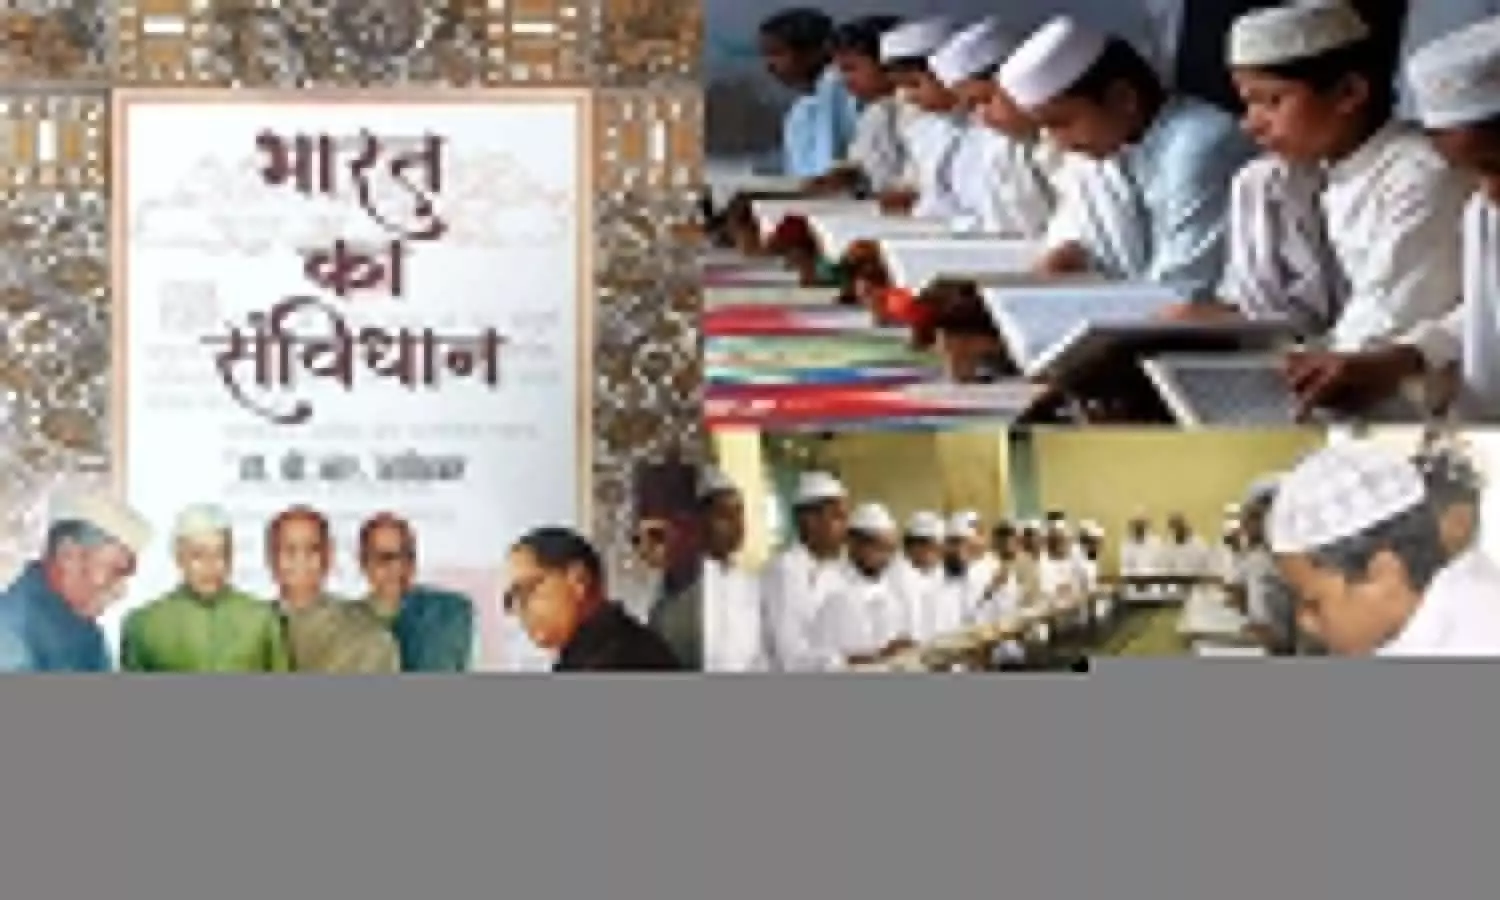 The Constitution of India will be included in the education of madrassas